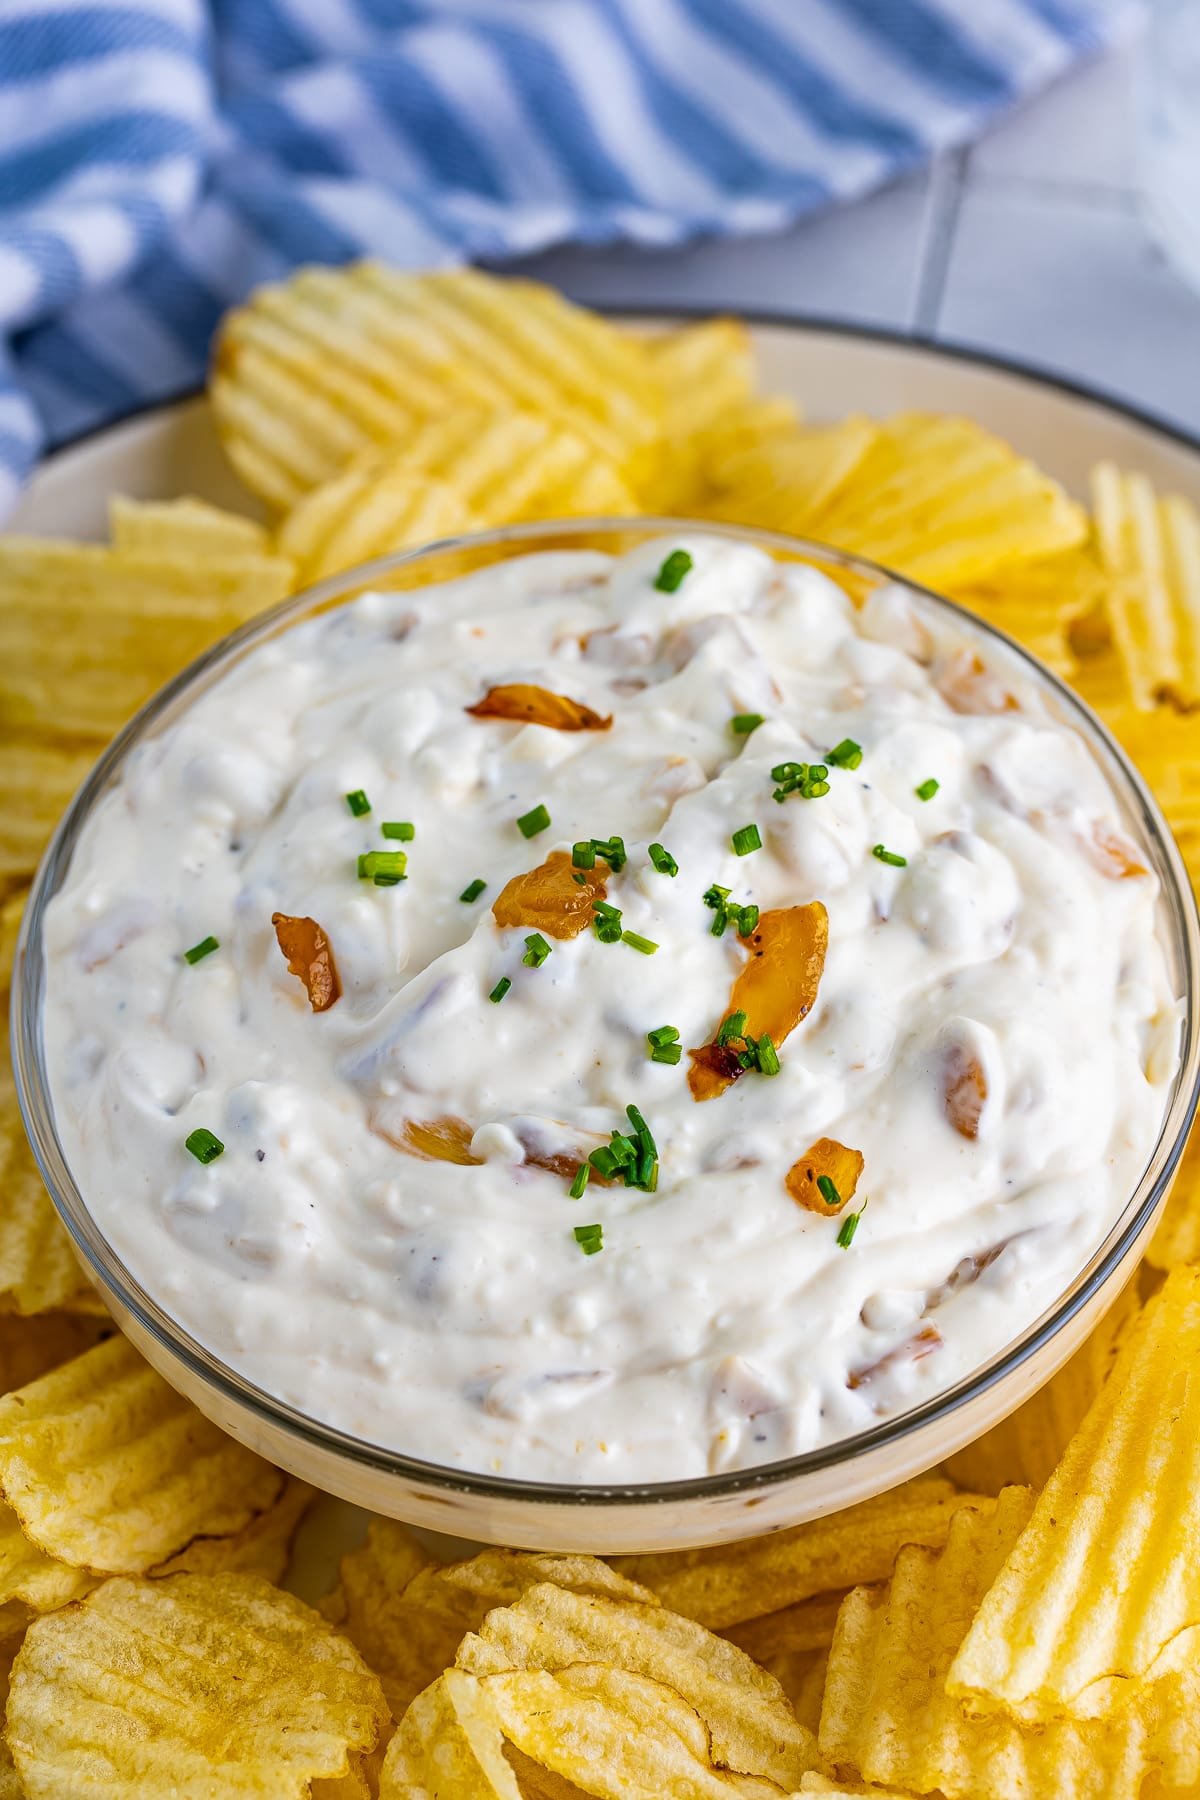 Angled shot of French onion dip recipe in a clear glass bowl surrounded by wavy potato chips, and blue striped kitchen towel